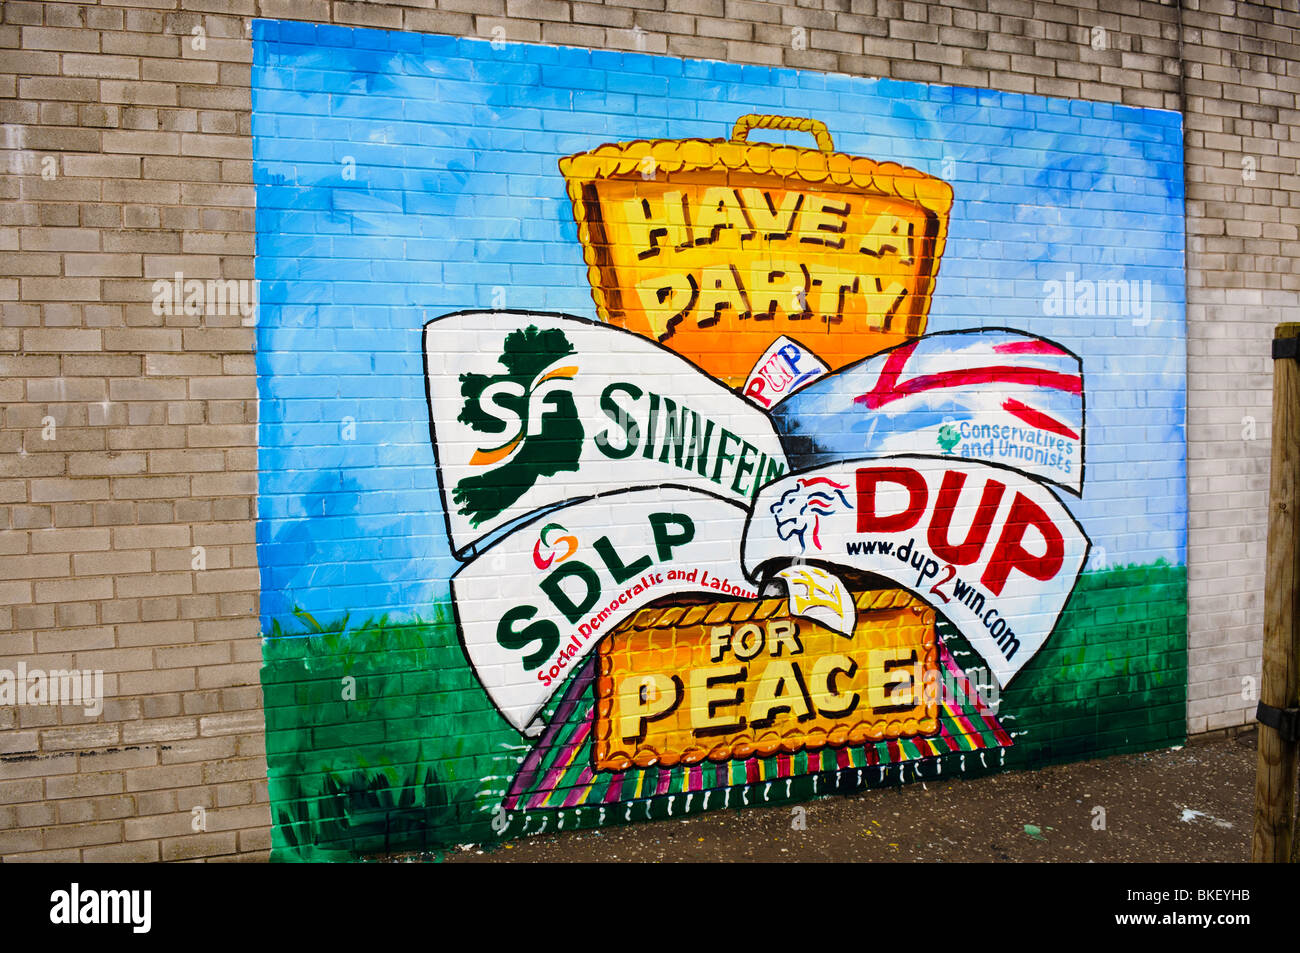 Mural on a wall with election banners for Sinn Fein, Ulster Unionist Party, SDLP and the Democratic Unionist party. Stock Photo